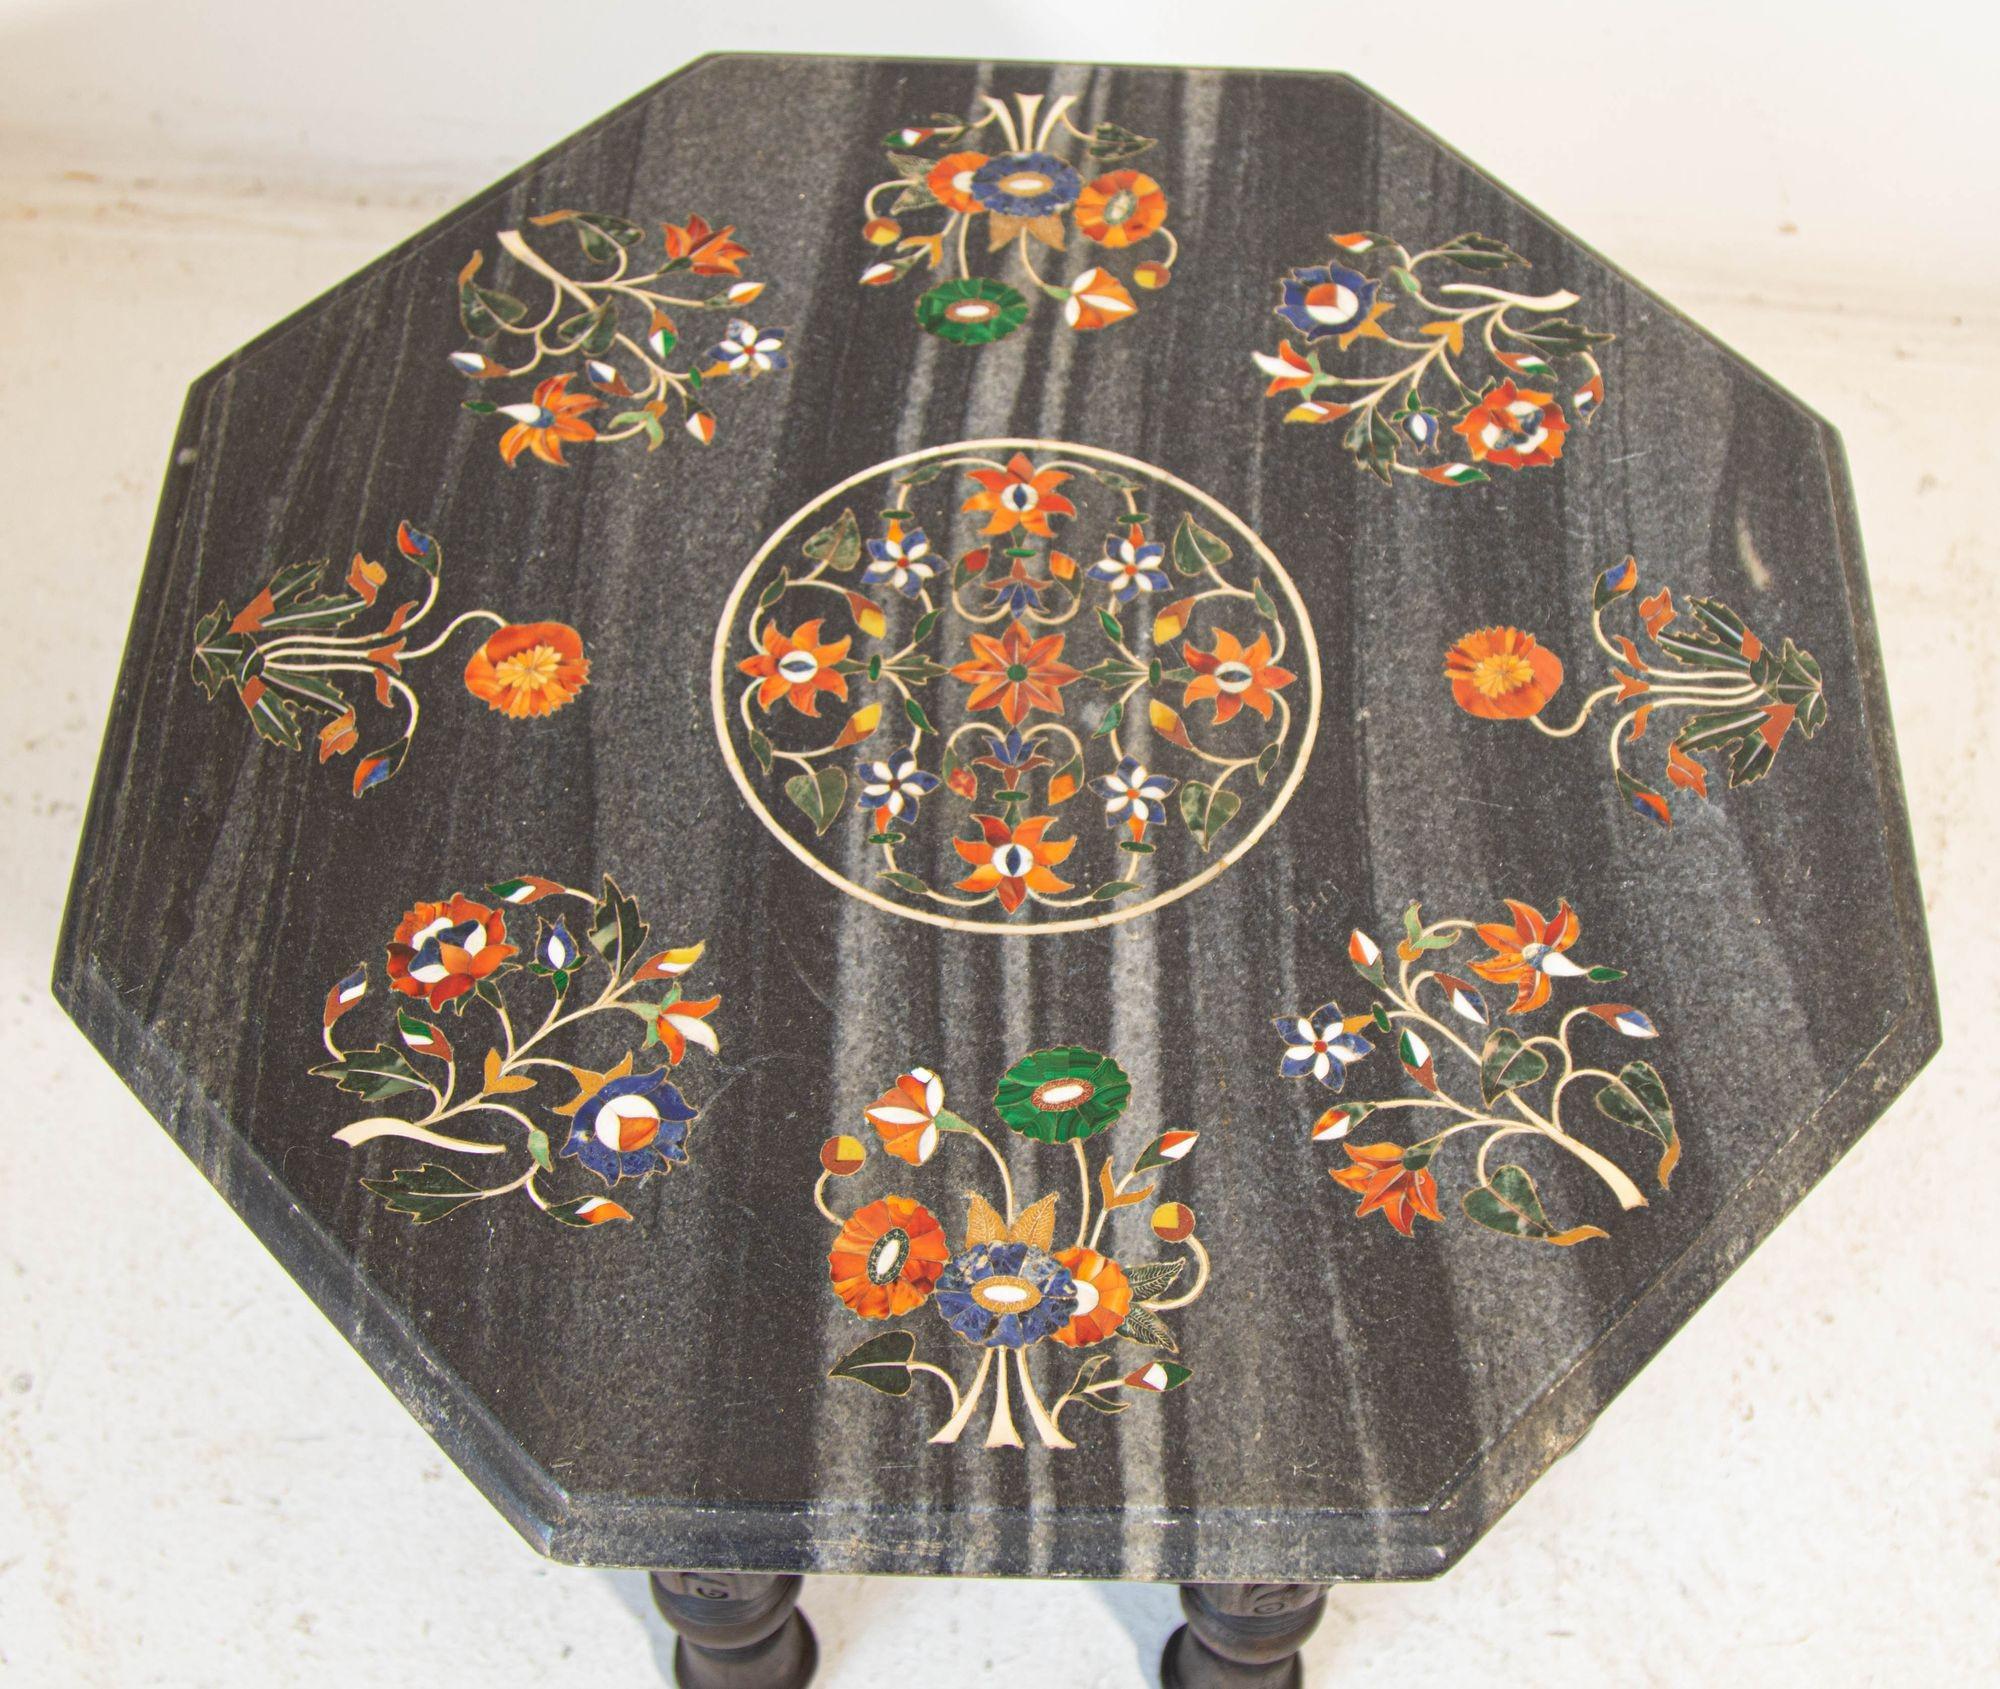 Vintage hand-crafted Pietra Dura Marble inlaid Octagonal Top Side Table Agra India.
Black marble Pietra Dura mosaic octagonal low side table marble inlaid with semiprecious stone like Lapis, Jade, Turquoise, jasper, carnelian for orange and natural